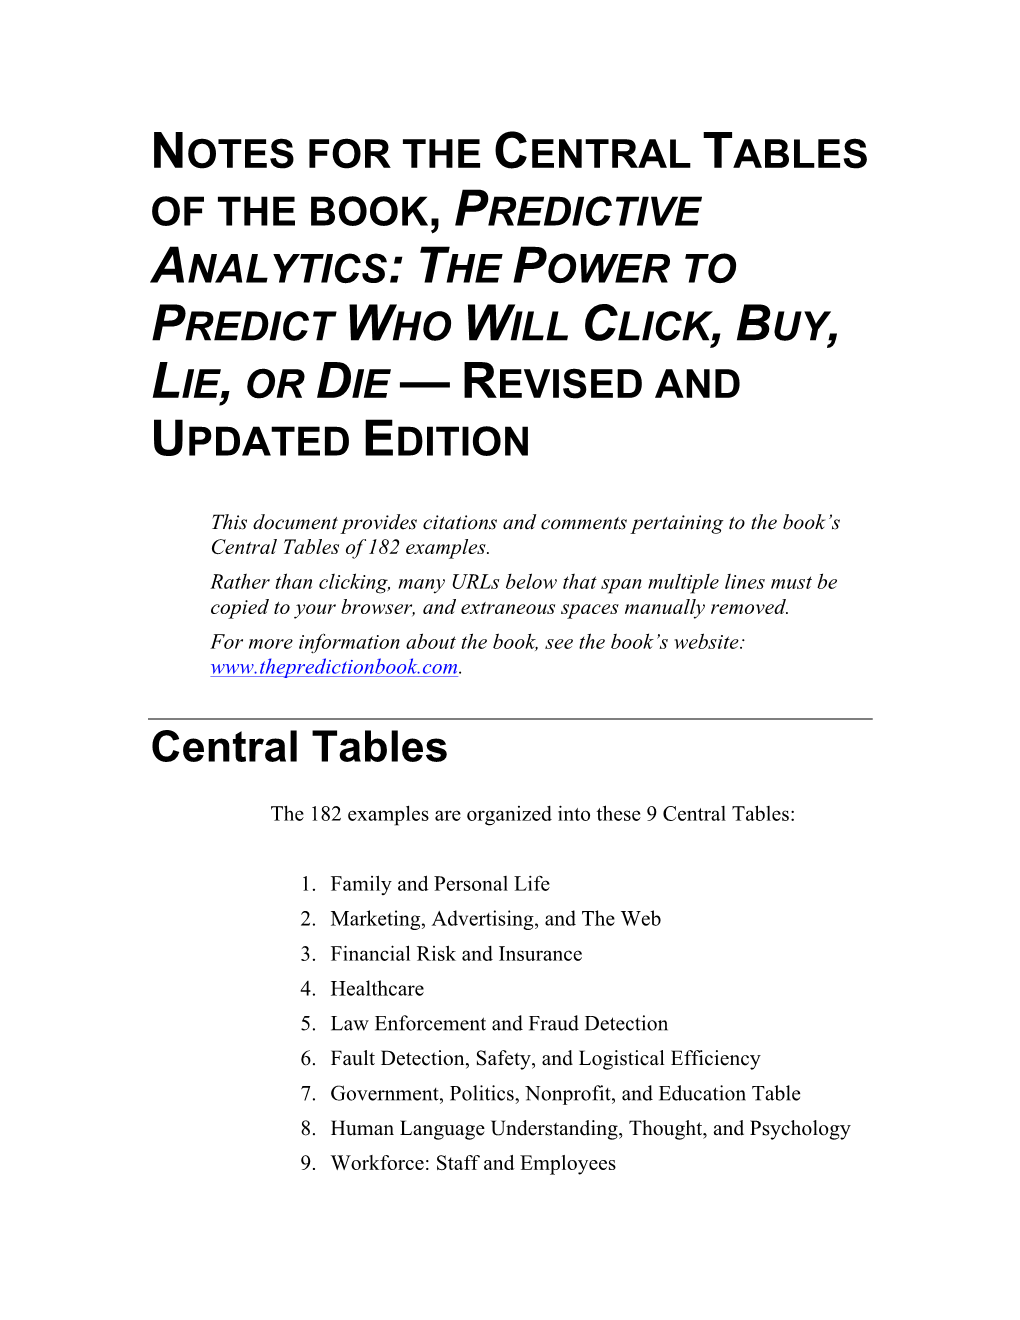 Notes for the Central Tables of the Book, Predictive Analytics: the Power to Predict Who Will Click, Buy, Lie, Or Die — Revised and Updated Edition